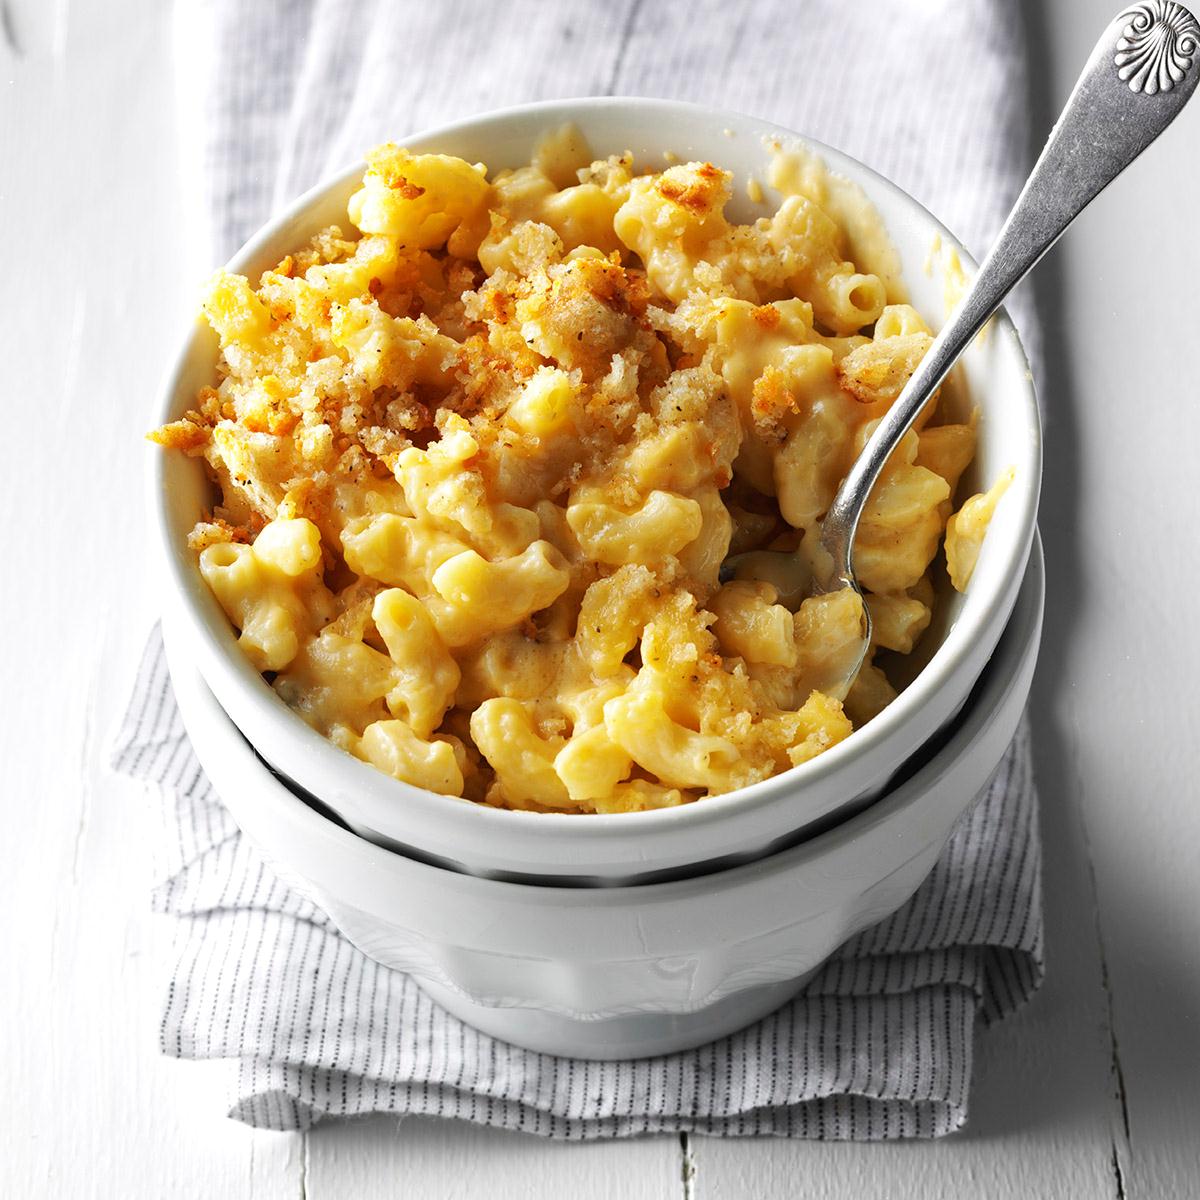 Recipes for macaroni cheese in slow cooker